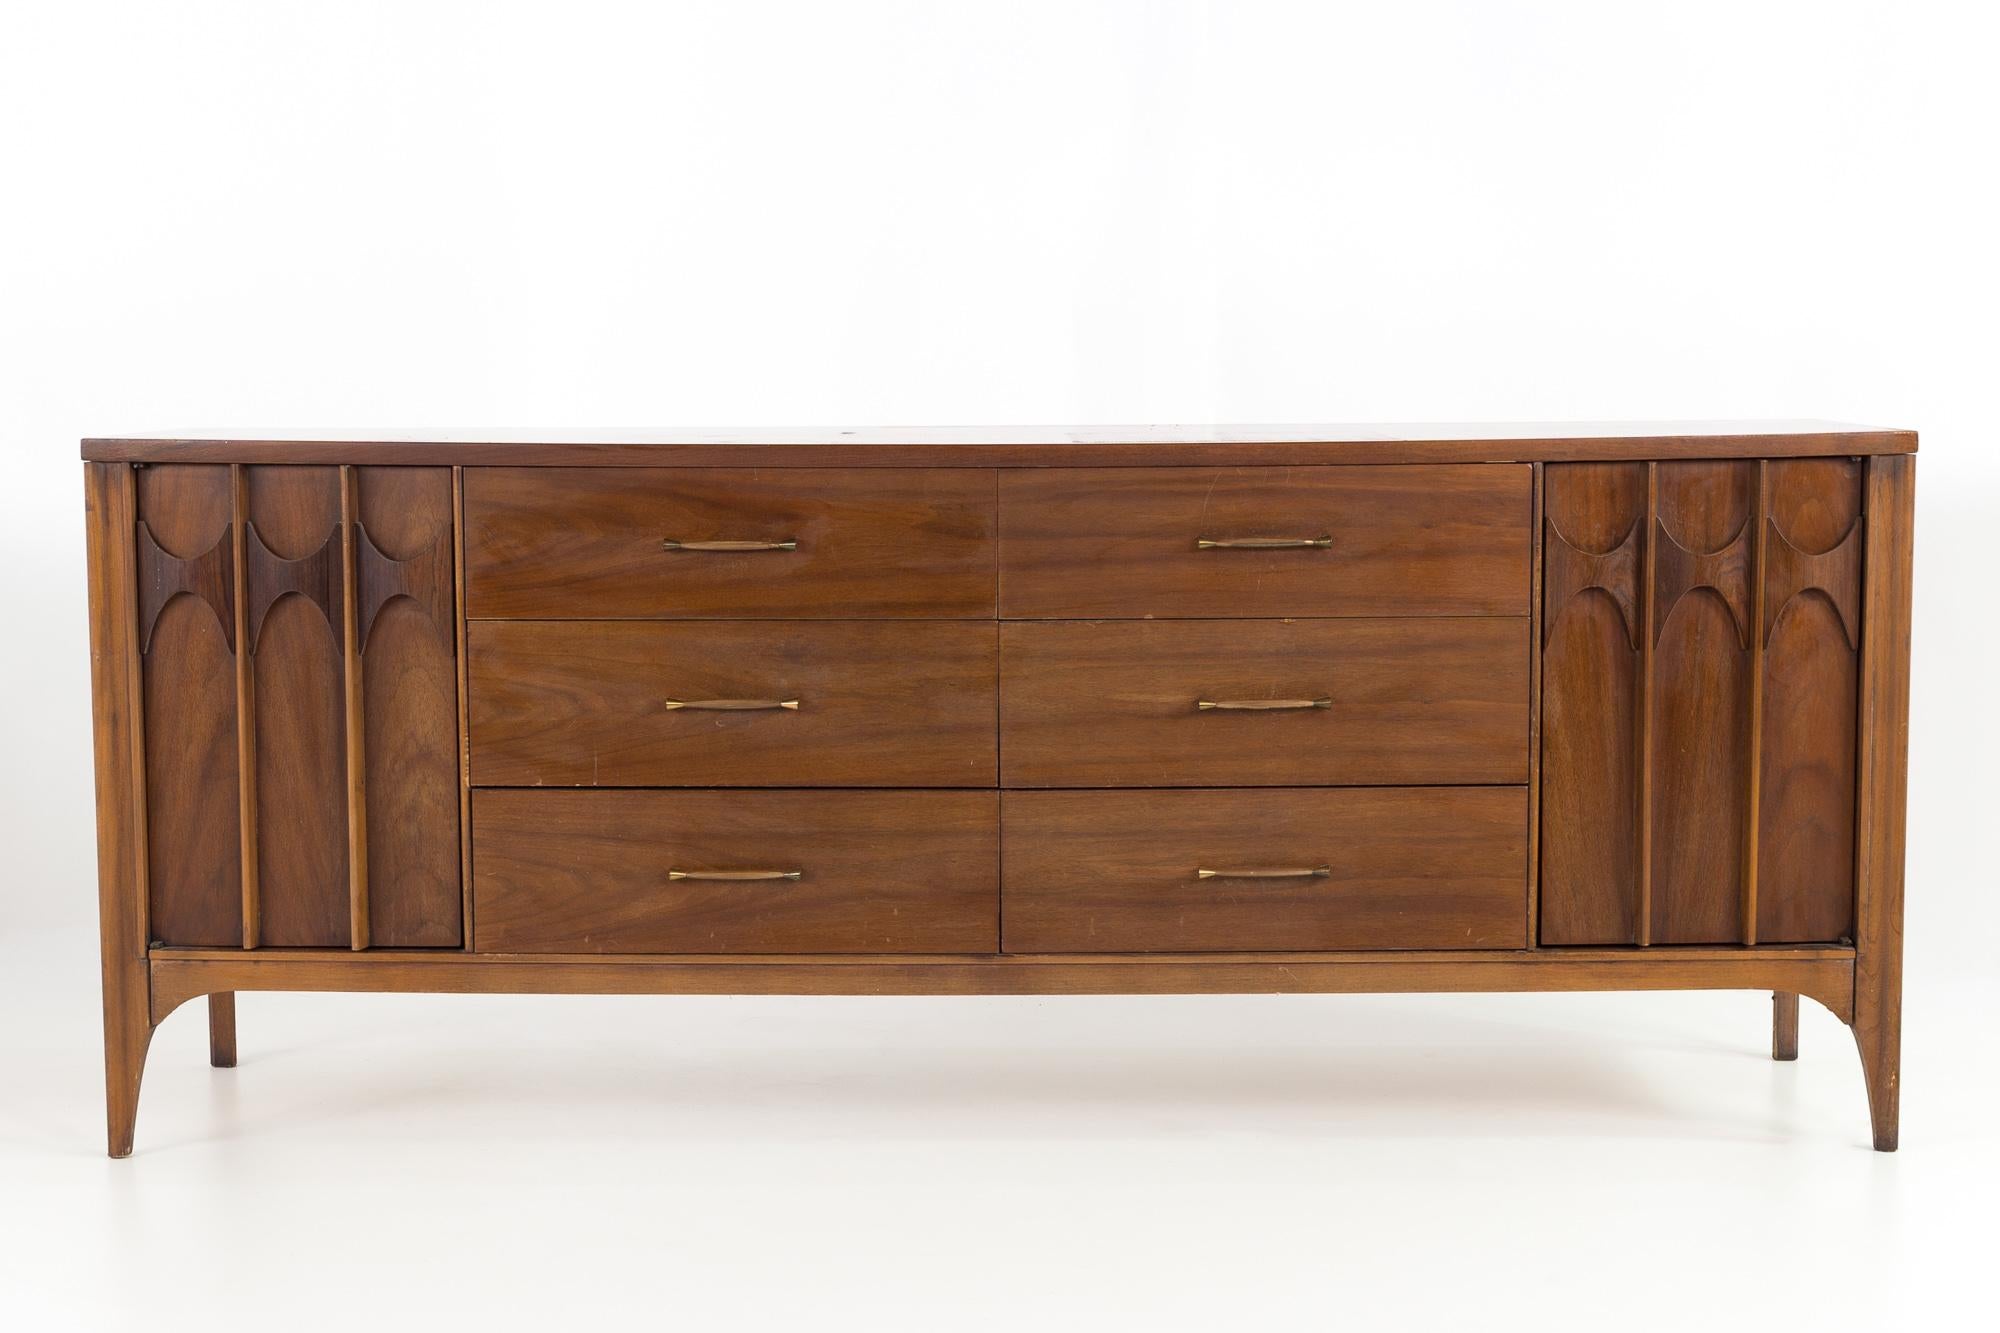 Kent Coffey Perspecta mid century rosewood and walnut 12 drawer lowboy dresser
This dresser measures: 77.5 long x 20.25 deep x 31.25 inches high

All pieces of furniture can be had in what we call restored vintage condition. That means the piece